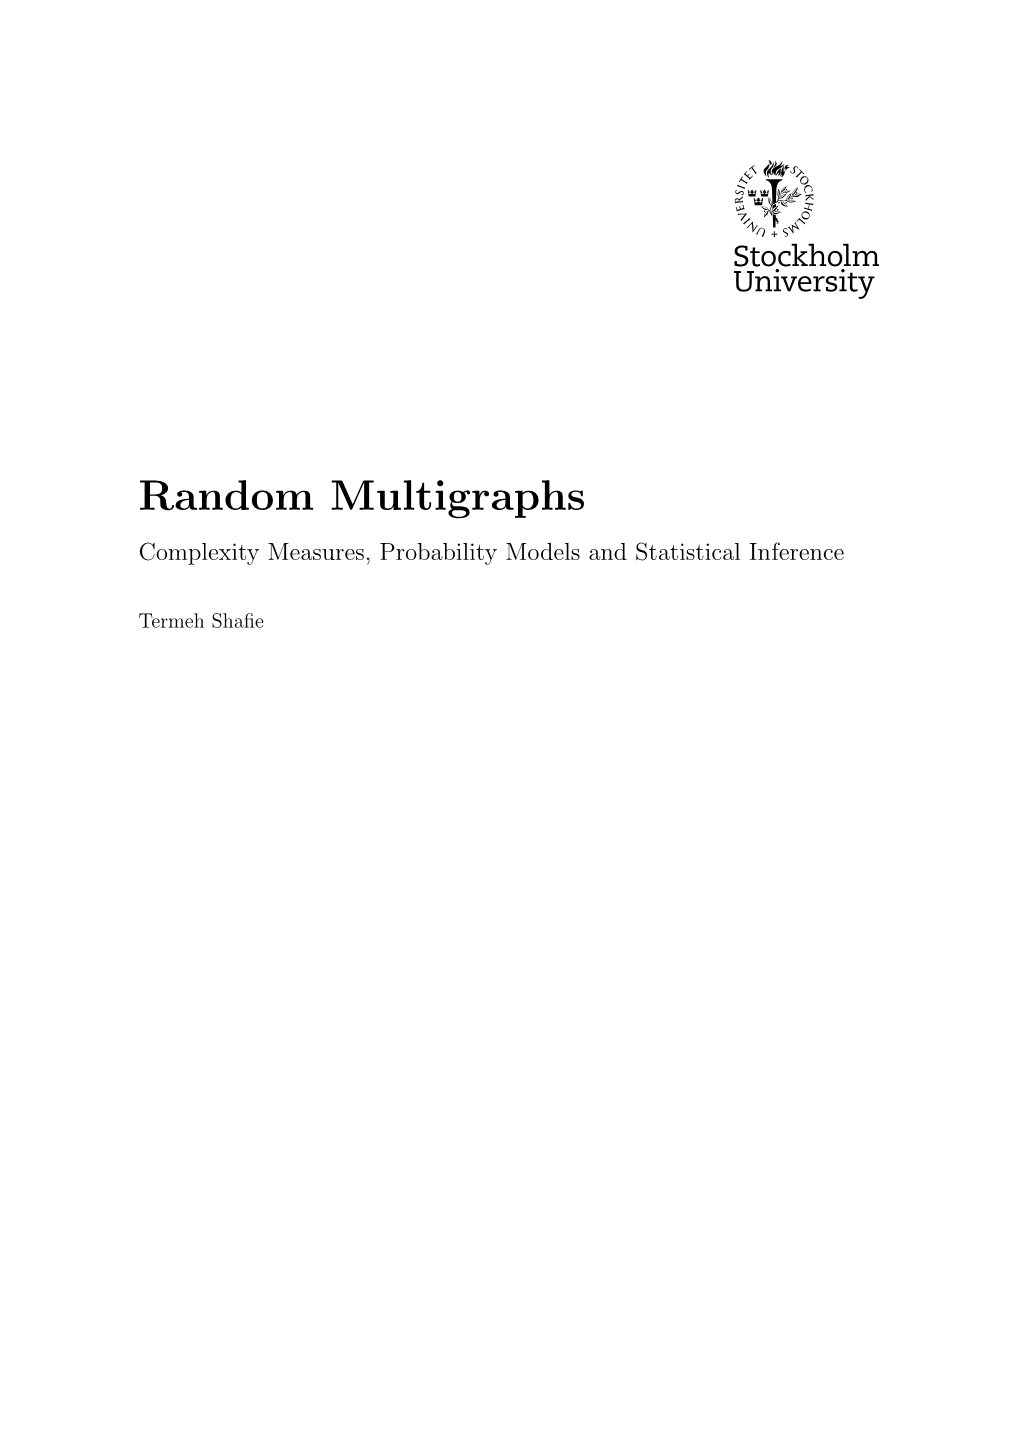 Random Multigraphs Complexity Measures, Probability Models and Statistical Inference